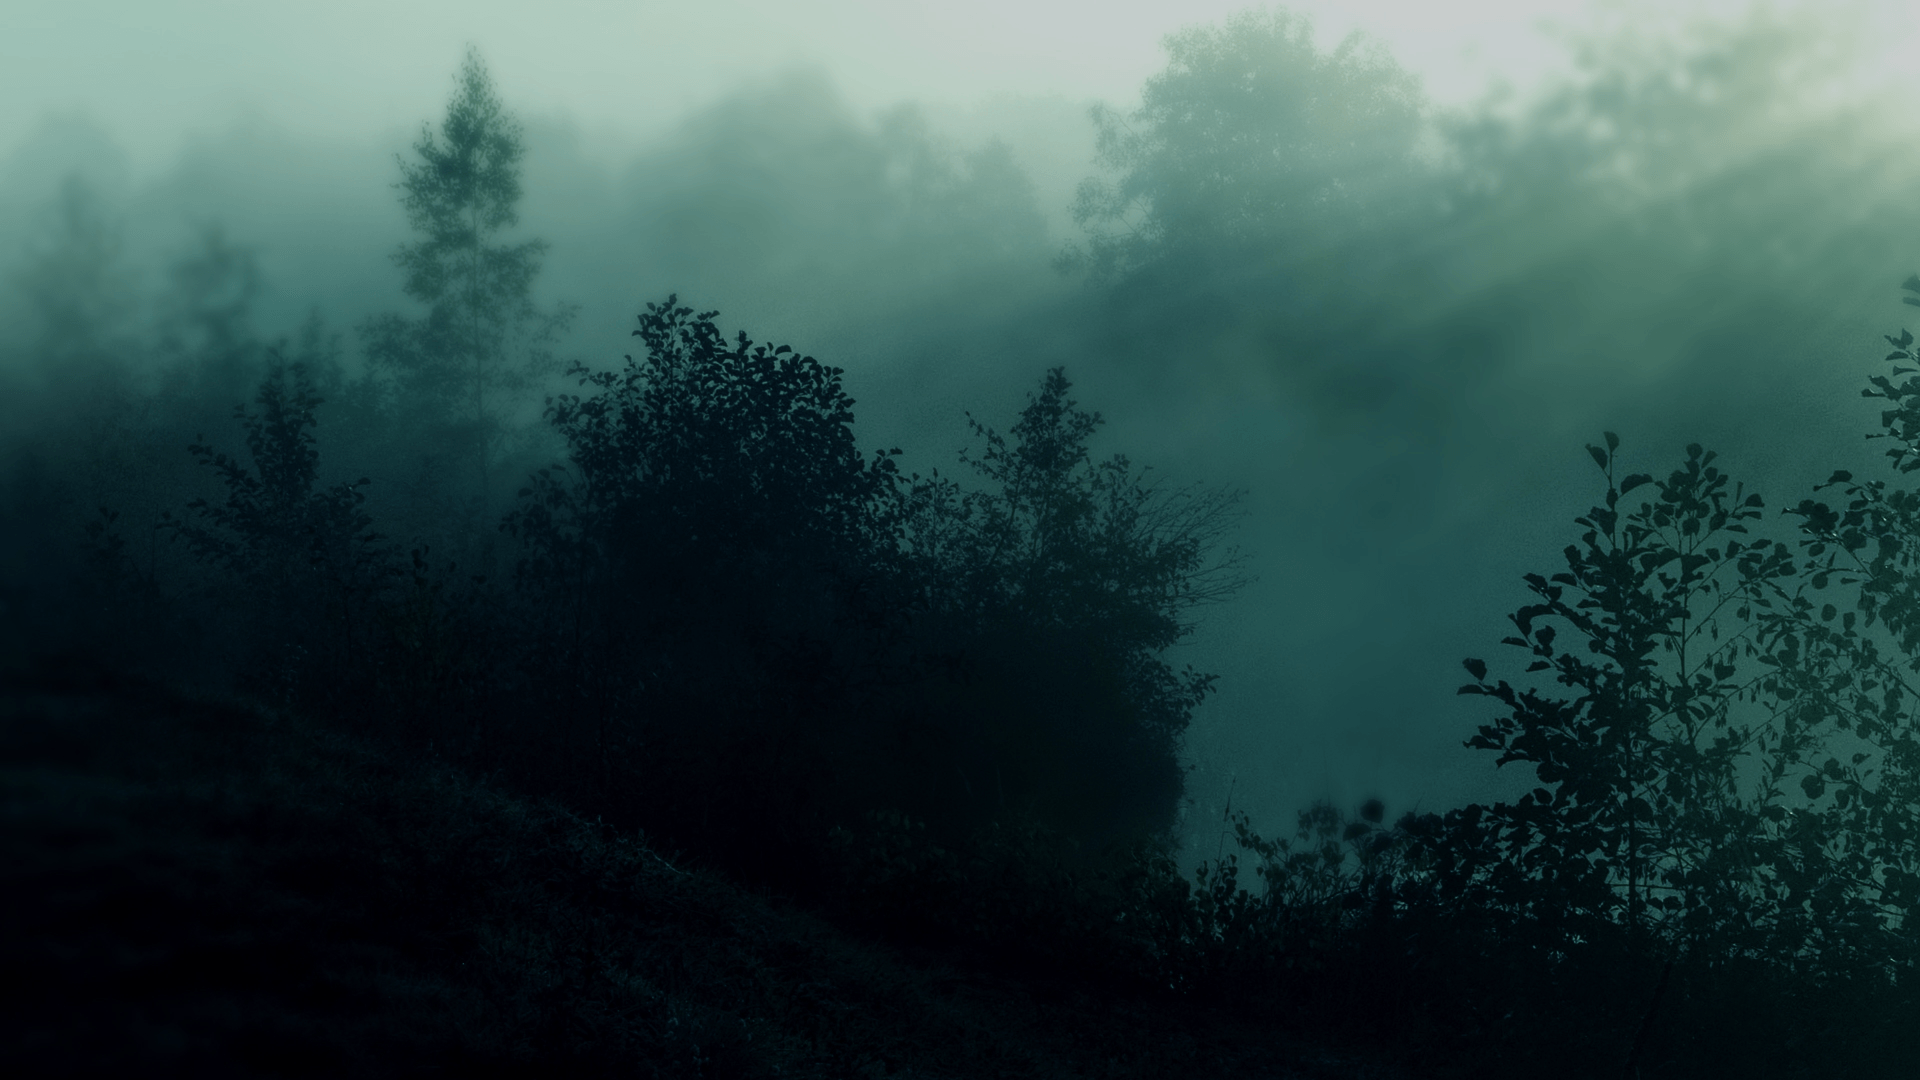 Download Wallpapers Nature Trees Dark Forest Mist Sunlight 1920x1080 HD Wal...